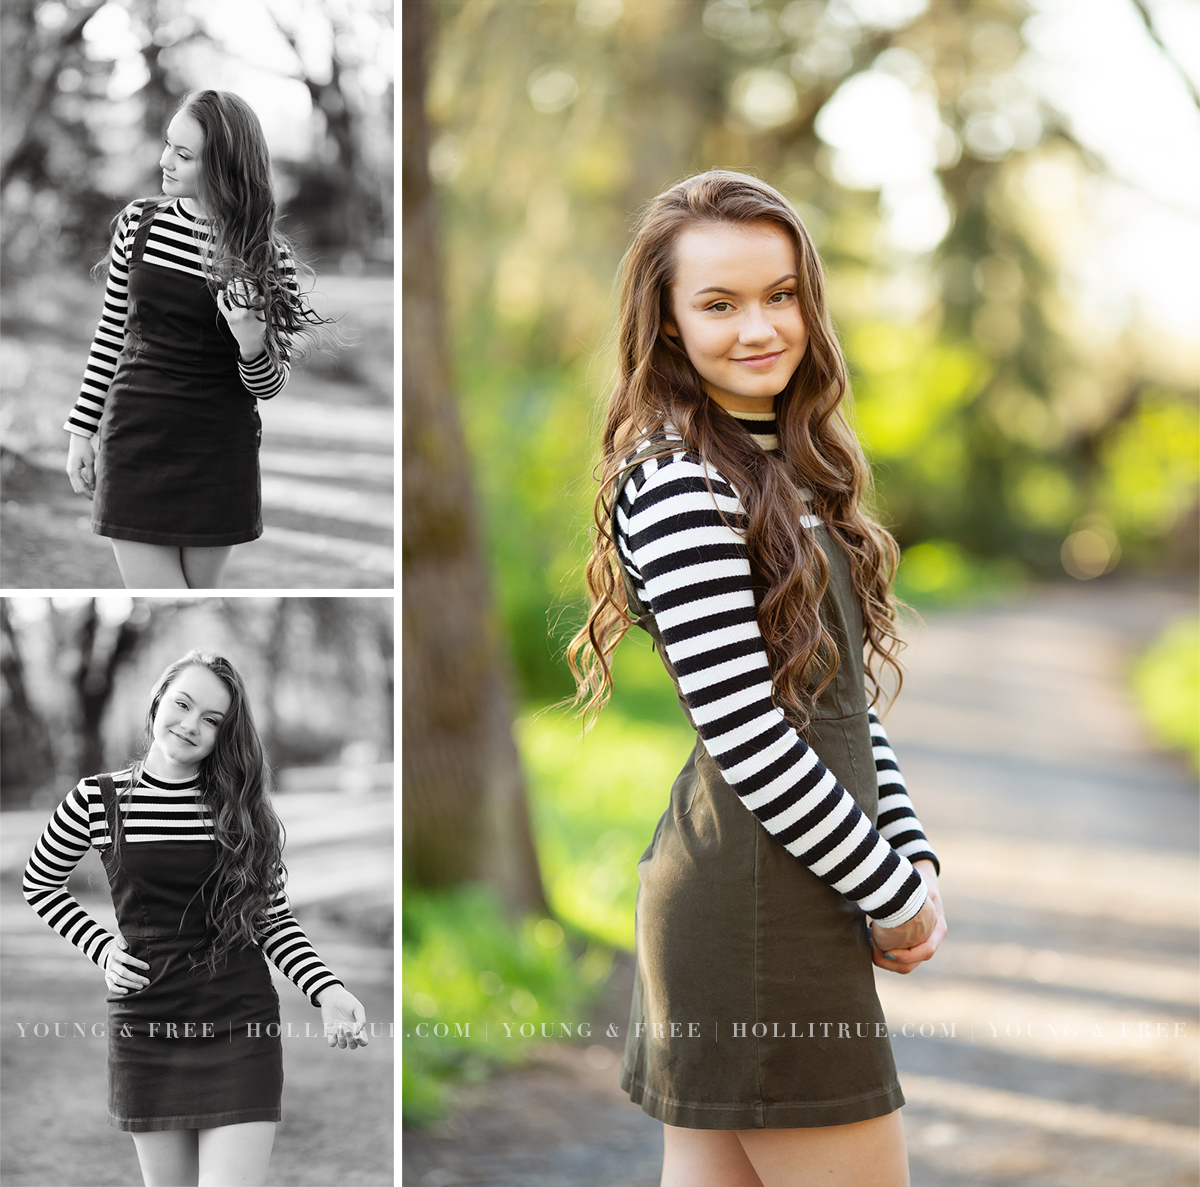 Stylish senior pictures | Overall dress with striped shirt | Fun and cute senior pictures | Holli True Photography